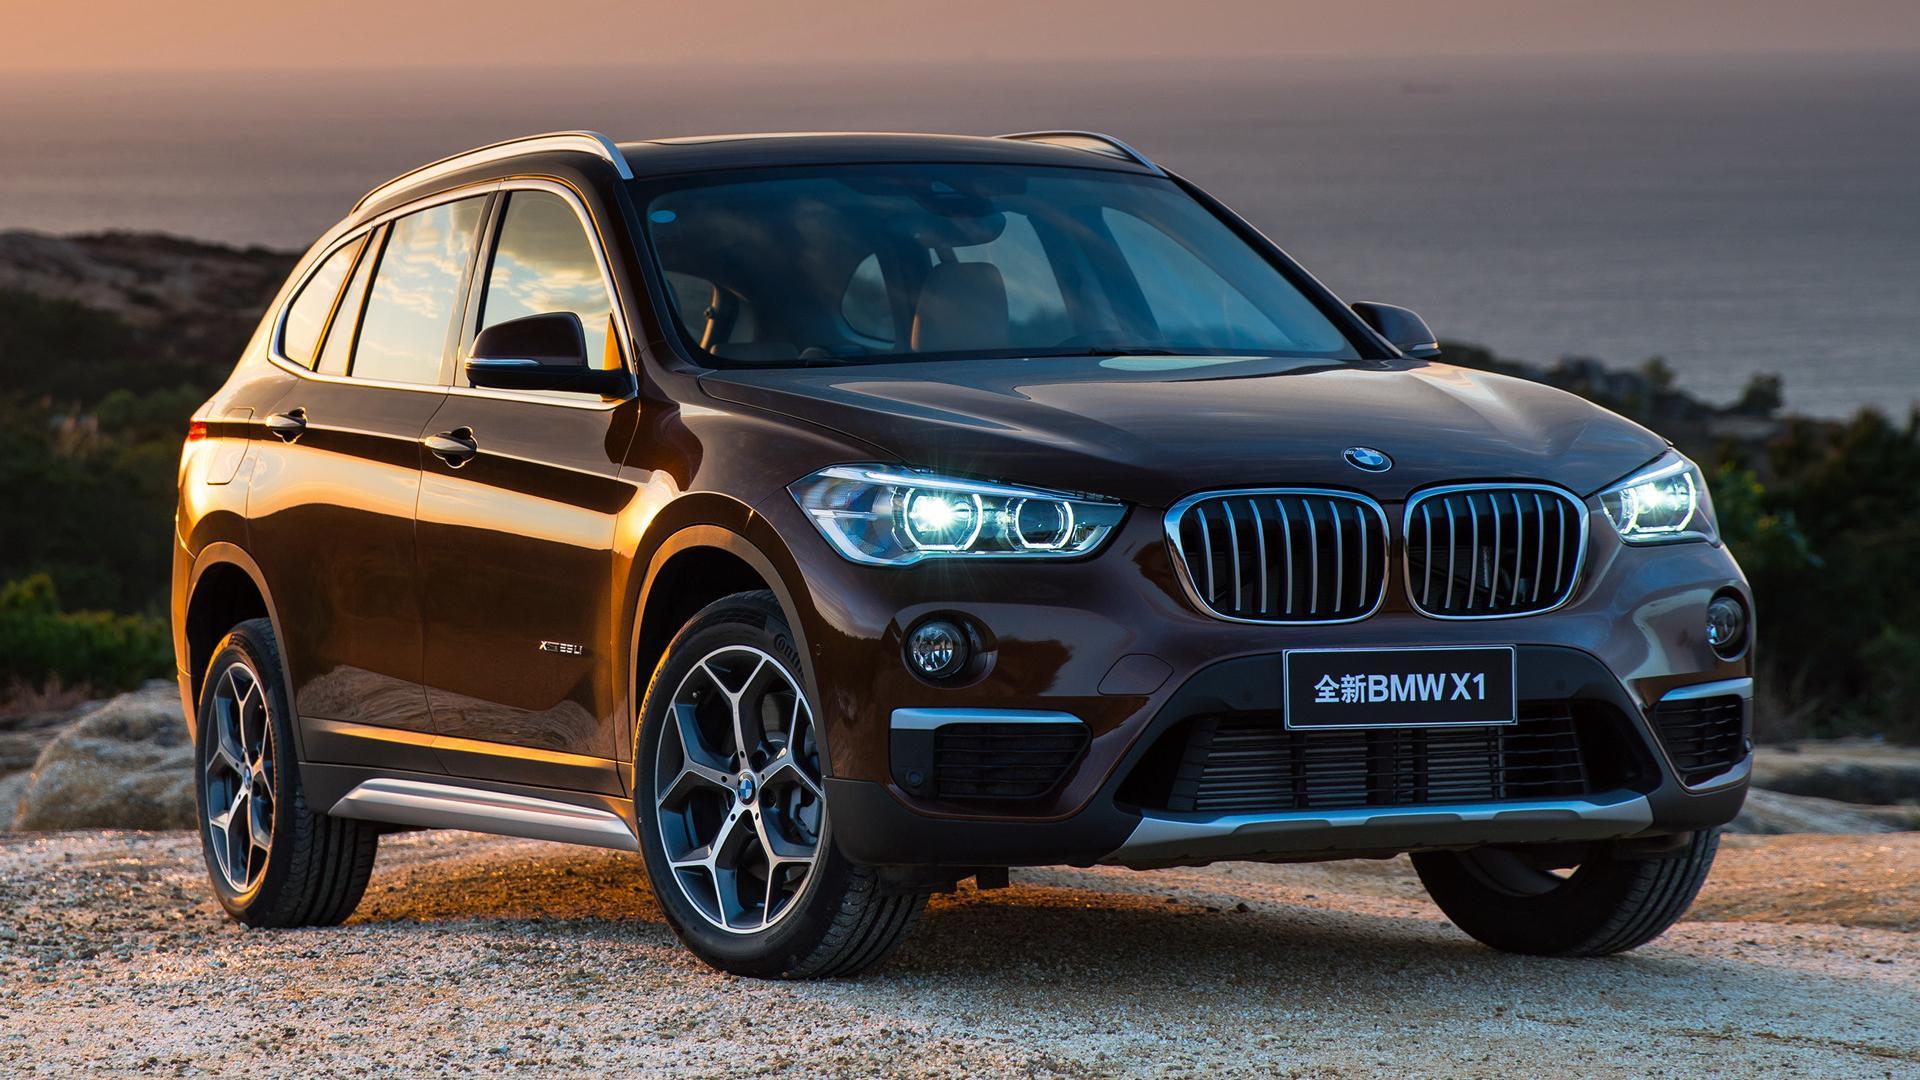 Bmw X1 Wallpapers Wallpaper Cave